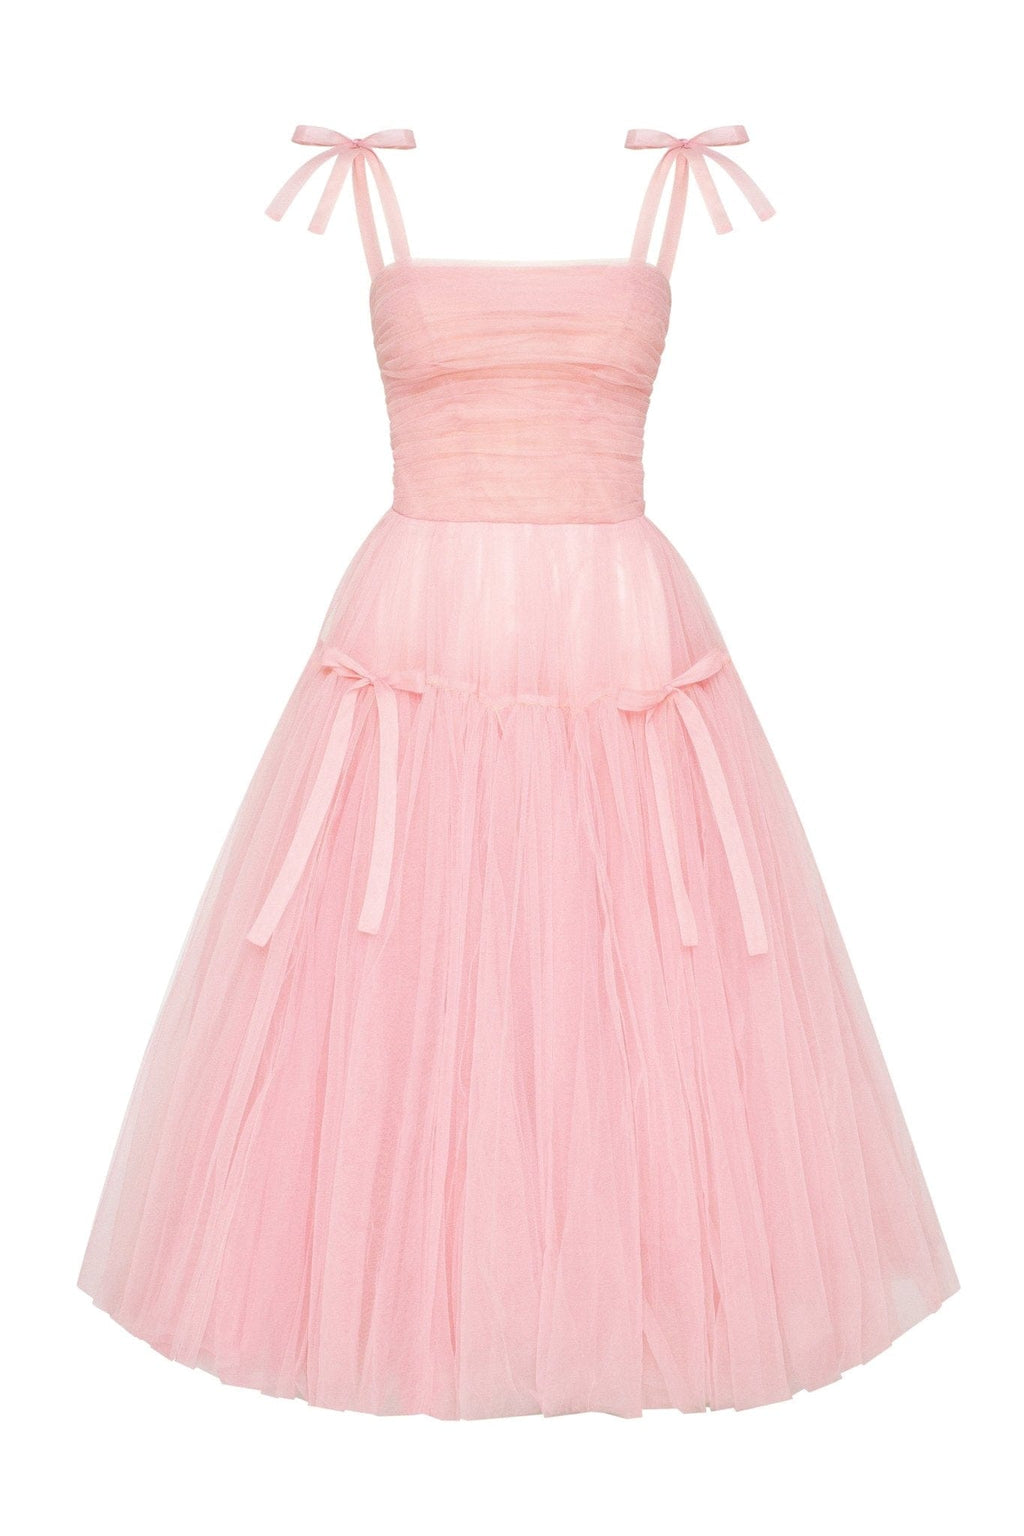 Misty Rose Ruffled Worldwide Dresses - Dress Milla Tulle Midi delivery ➤➤ USA